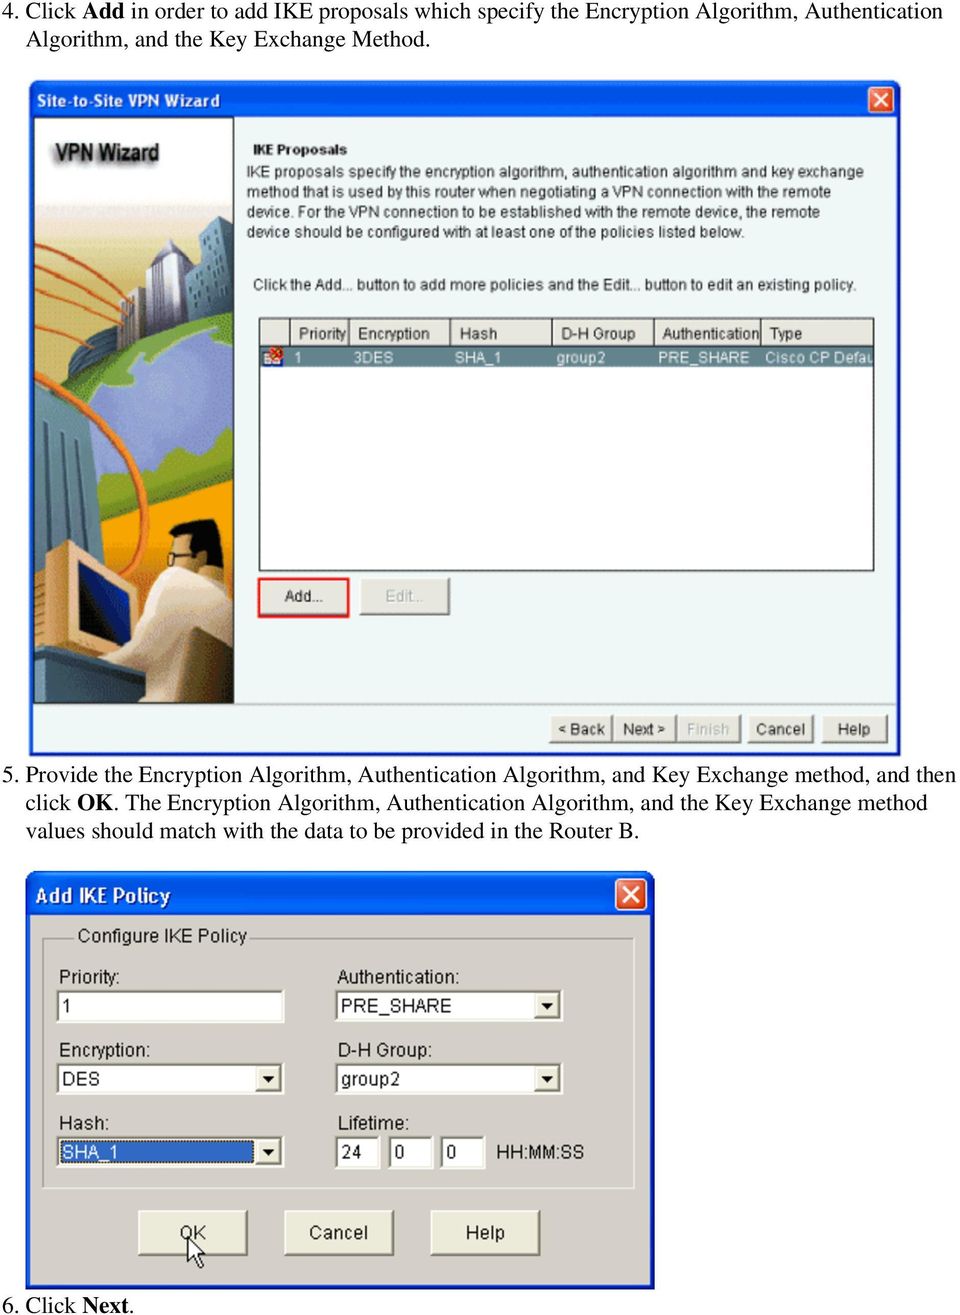 Provide the Encryption Algorithm, Authentication Algorithm, and Key Exchange method, and then click